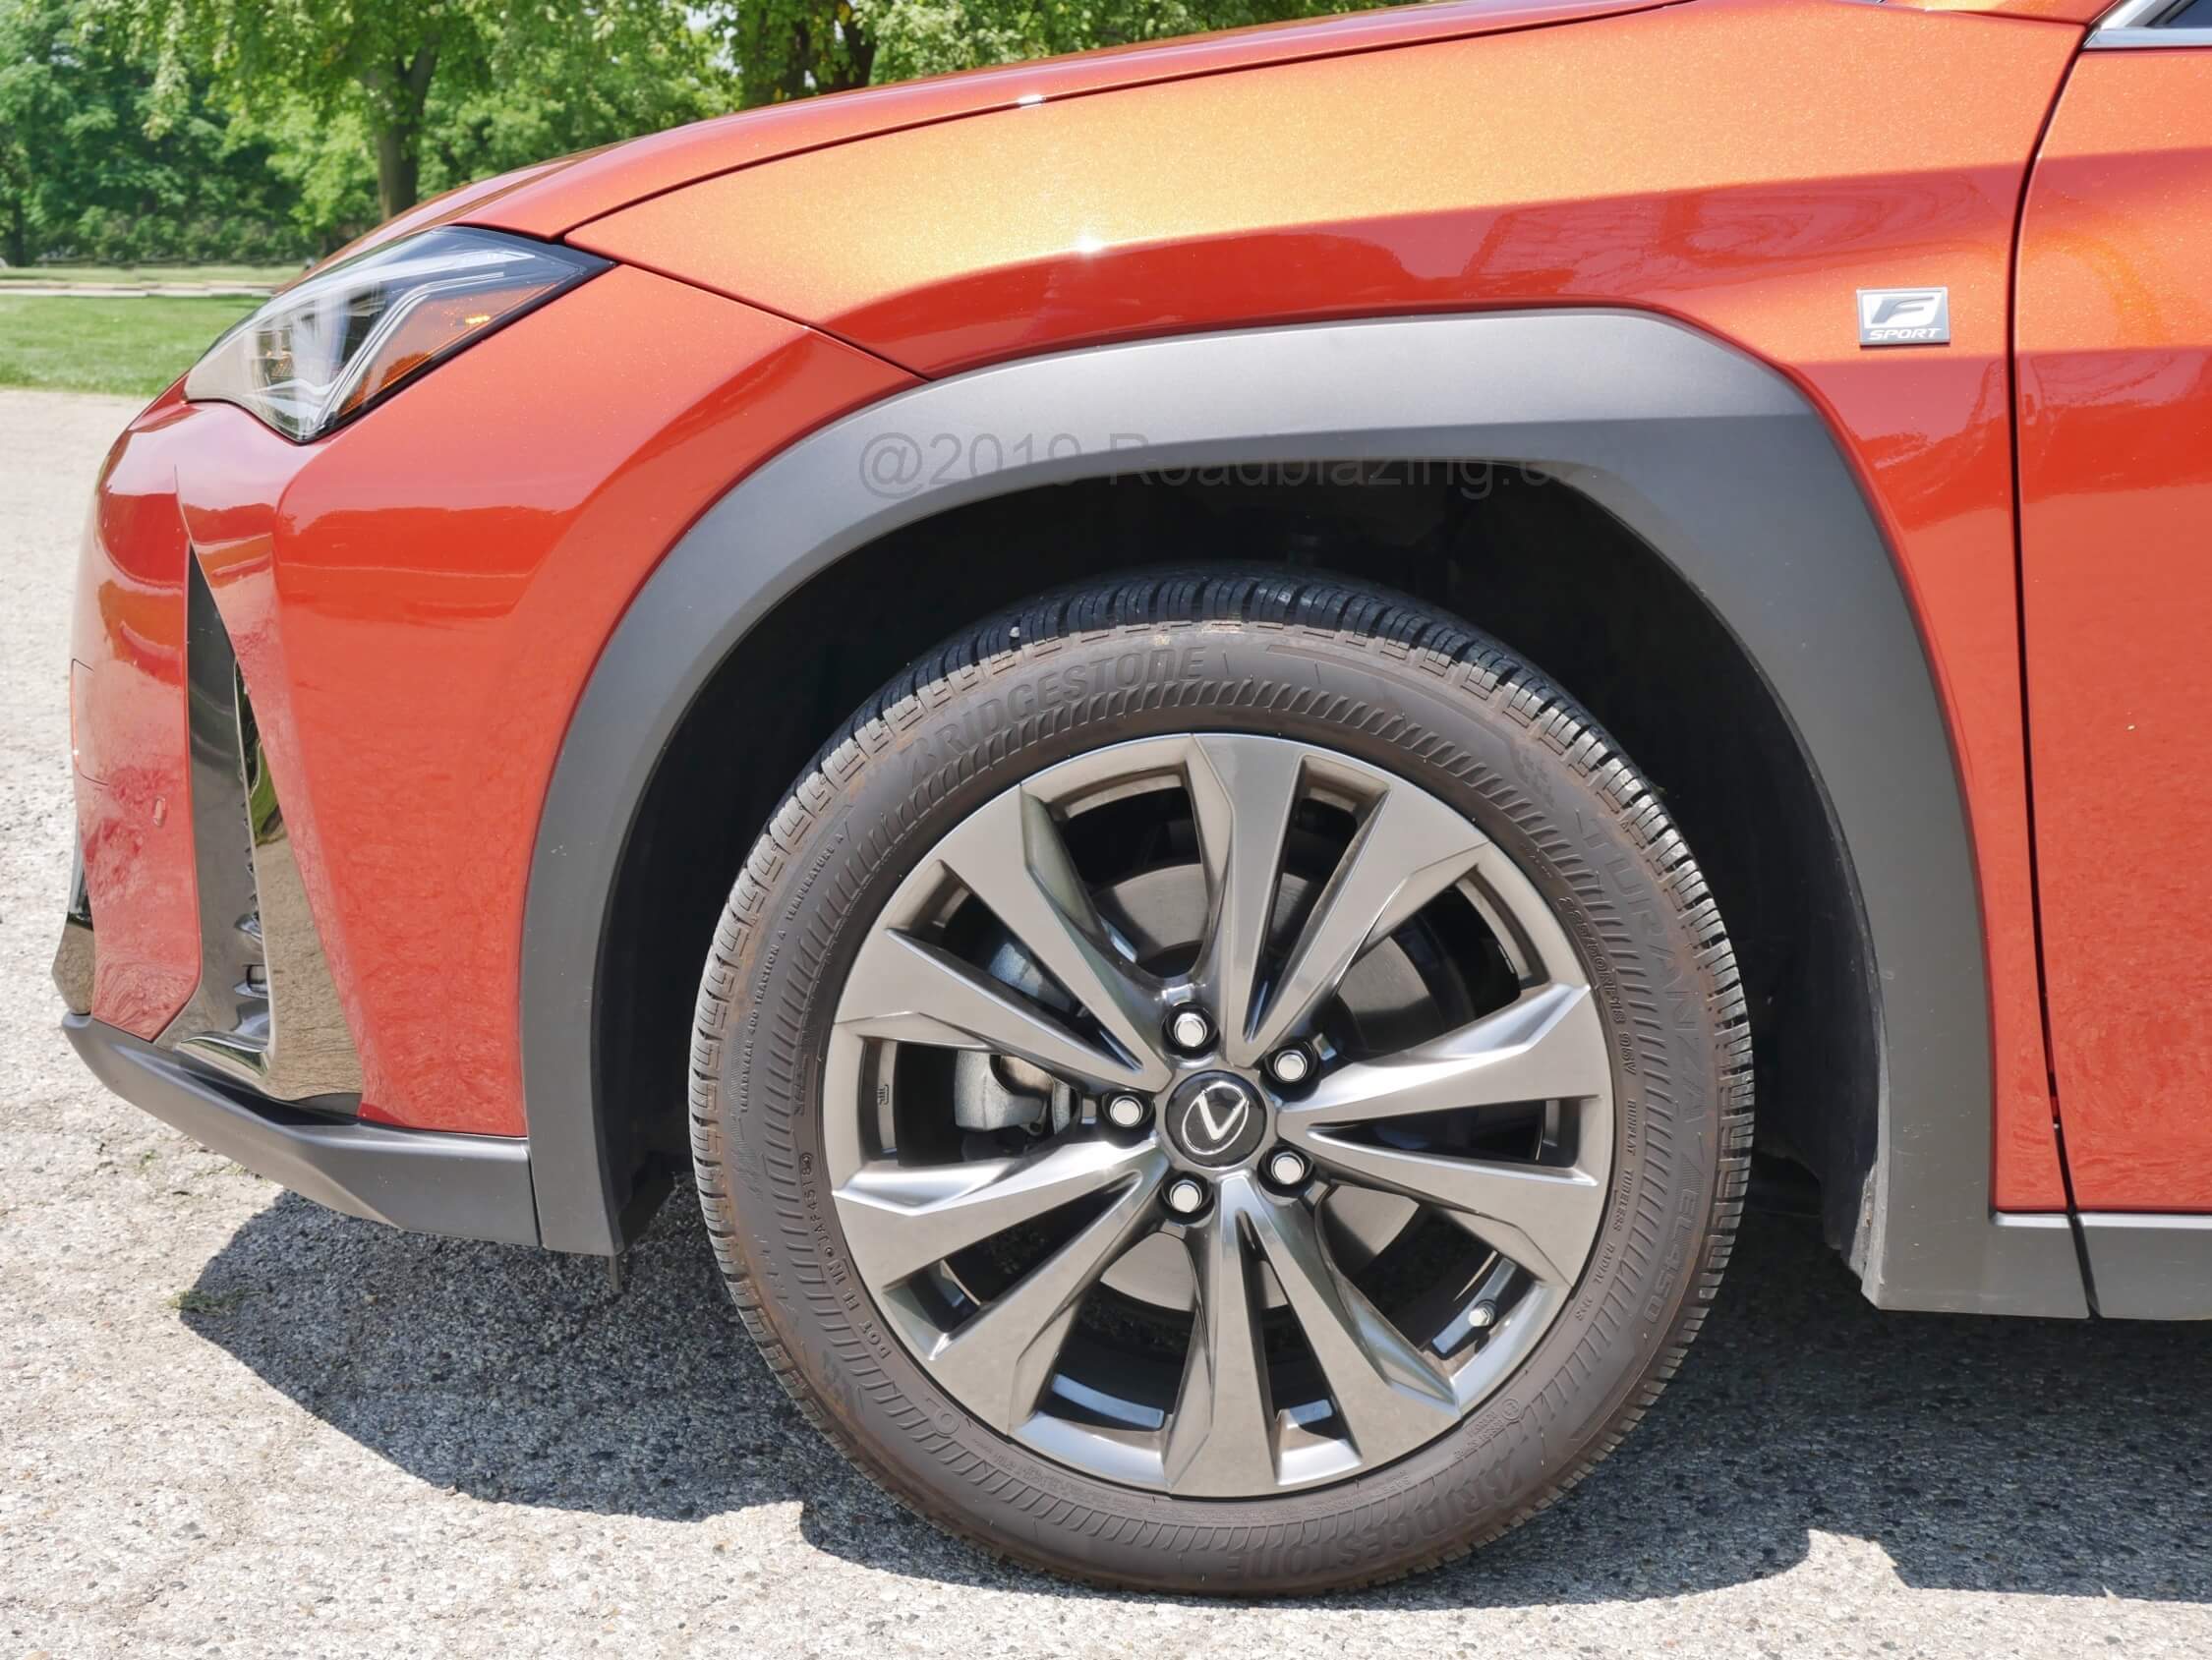 2019 Lexus UX 200 F-Sport: Front strut suspension joins rear multi-link damped for a forgiving ride and hushed aural experience on the 18" runflat all-season tires.